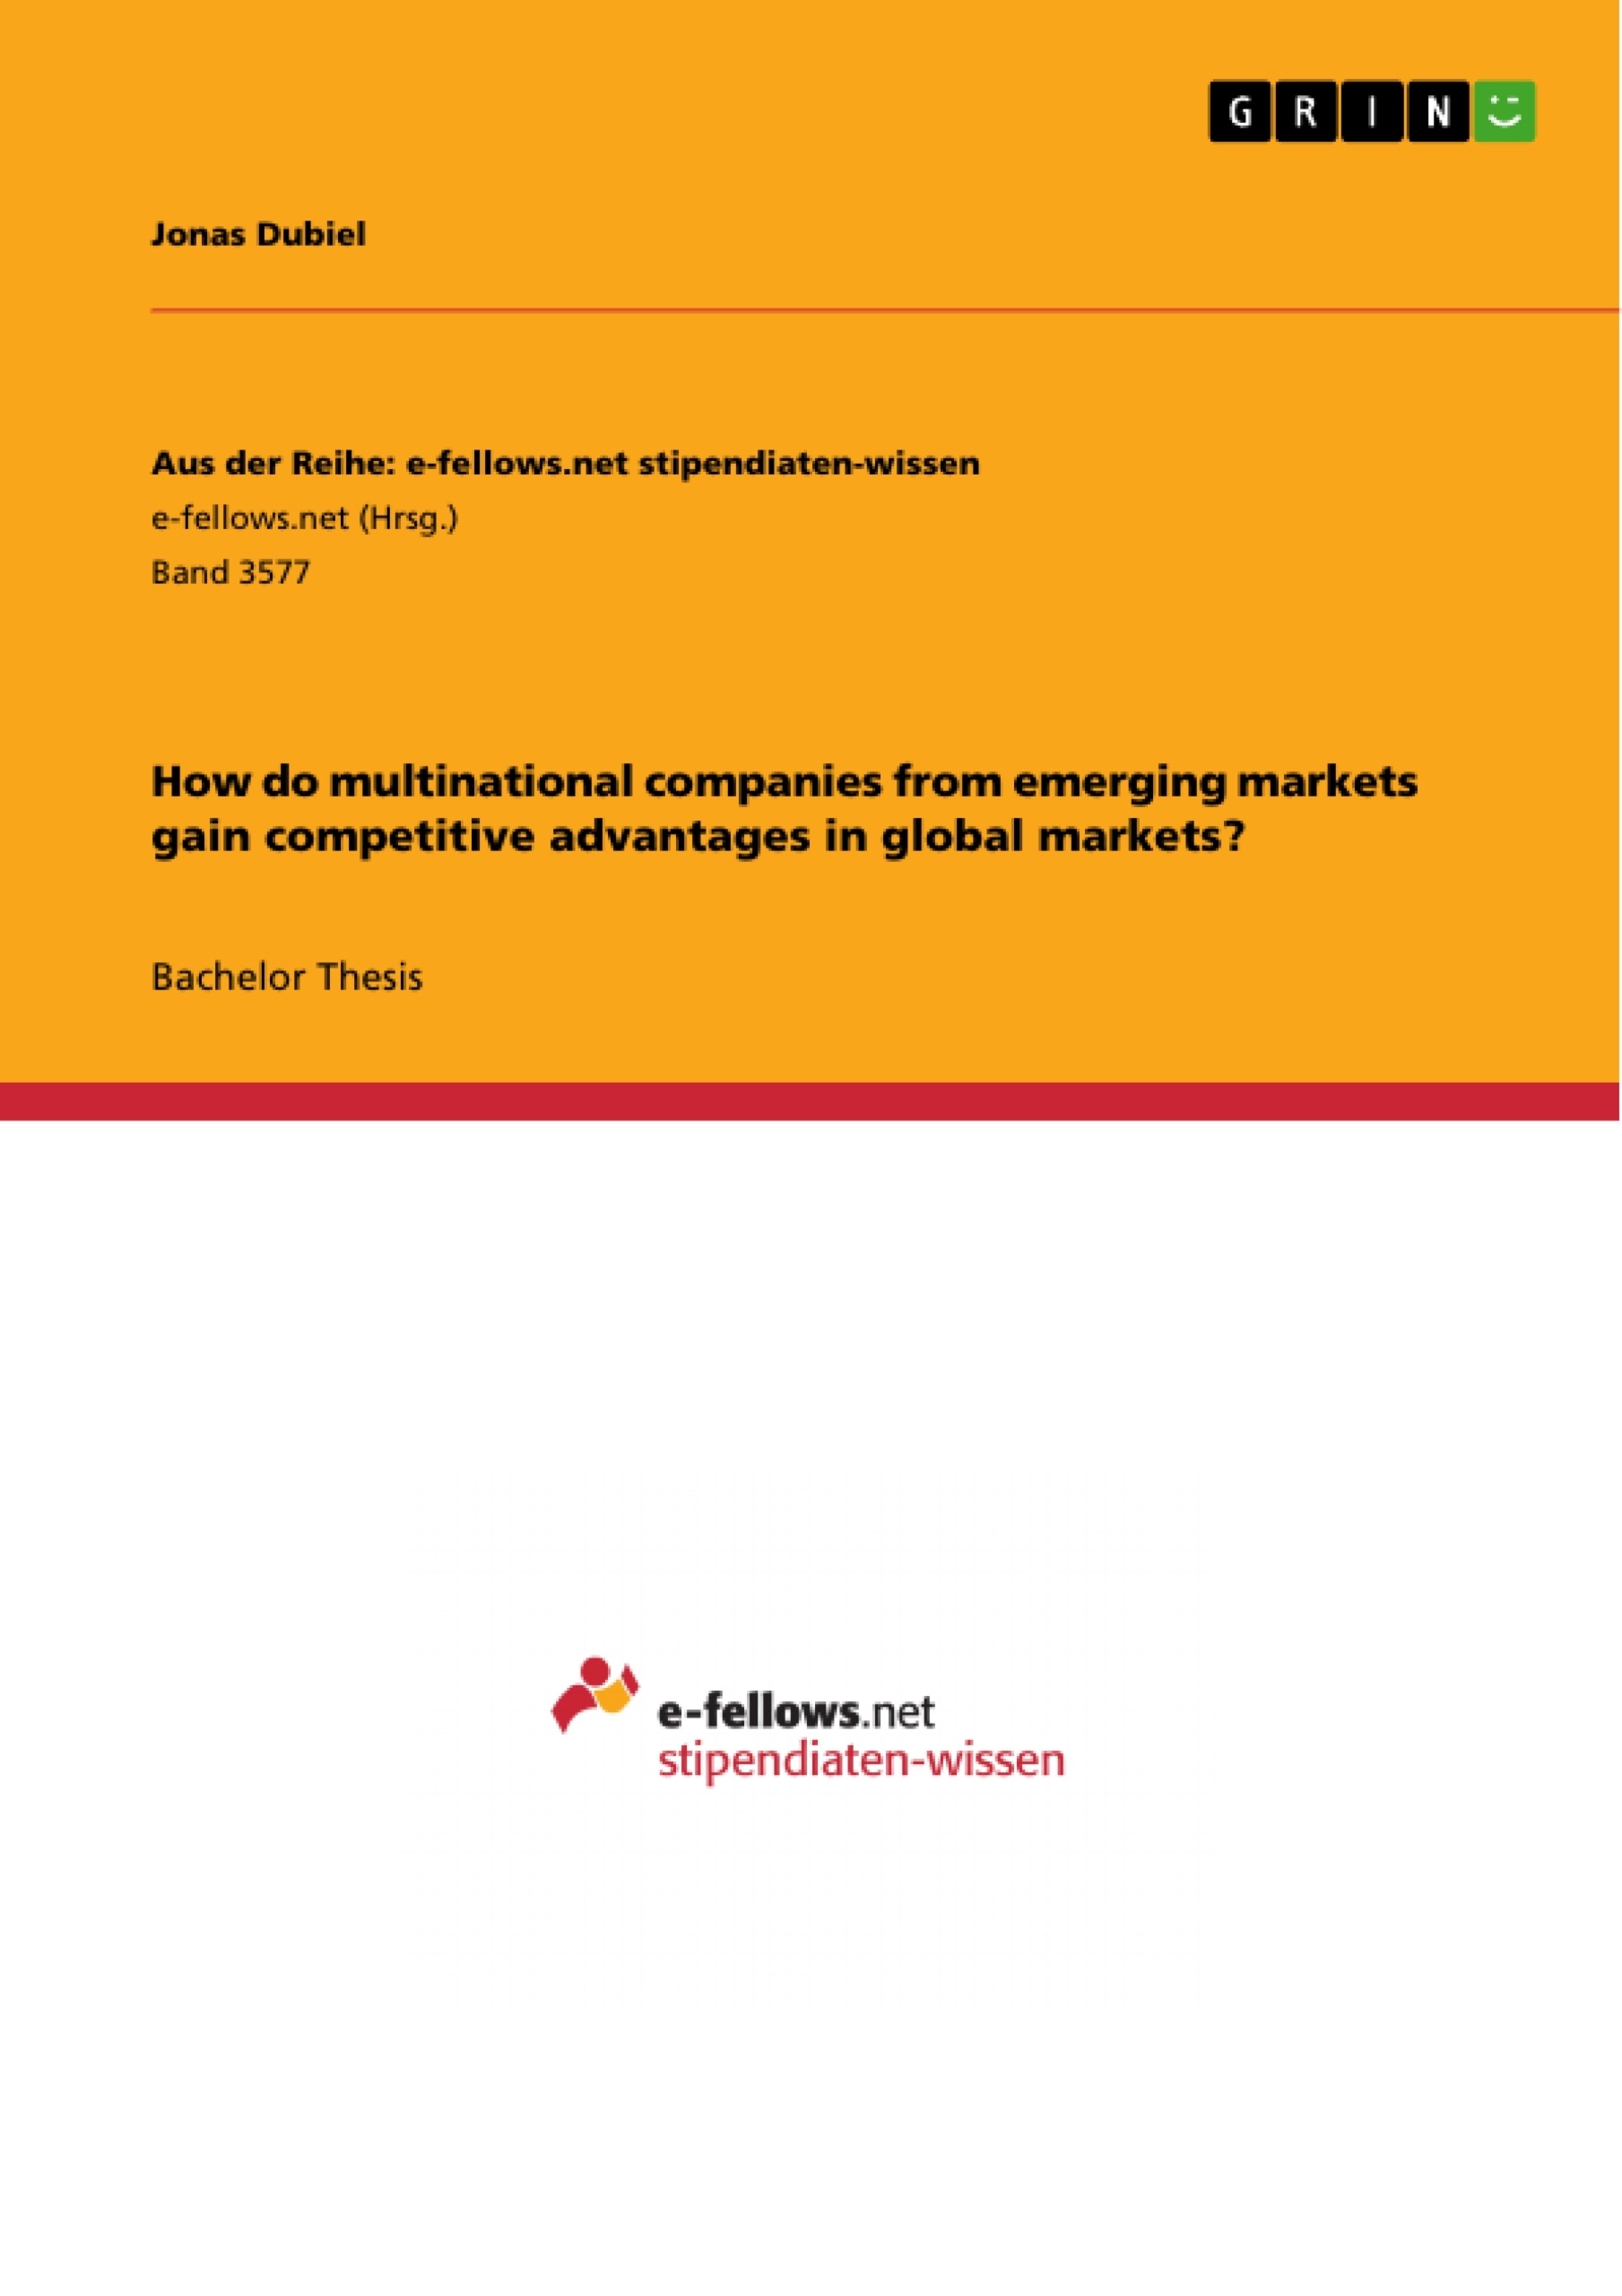 Titre: How do multinational companies from emerging markets gain competitive advantages in global markets?